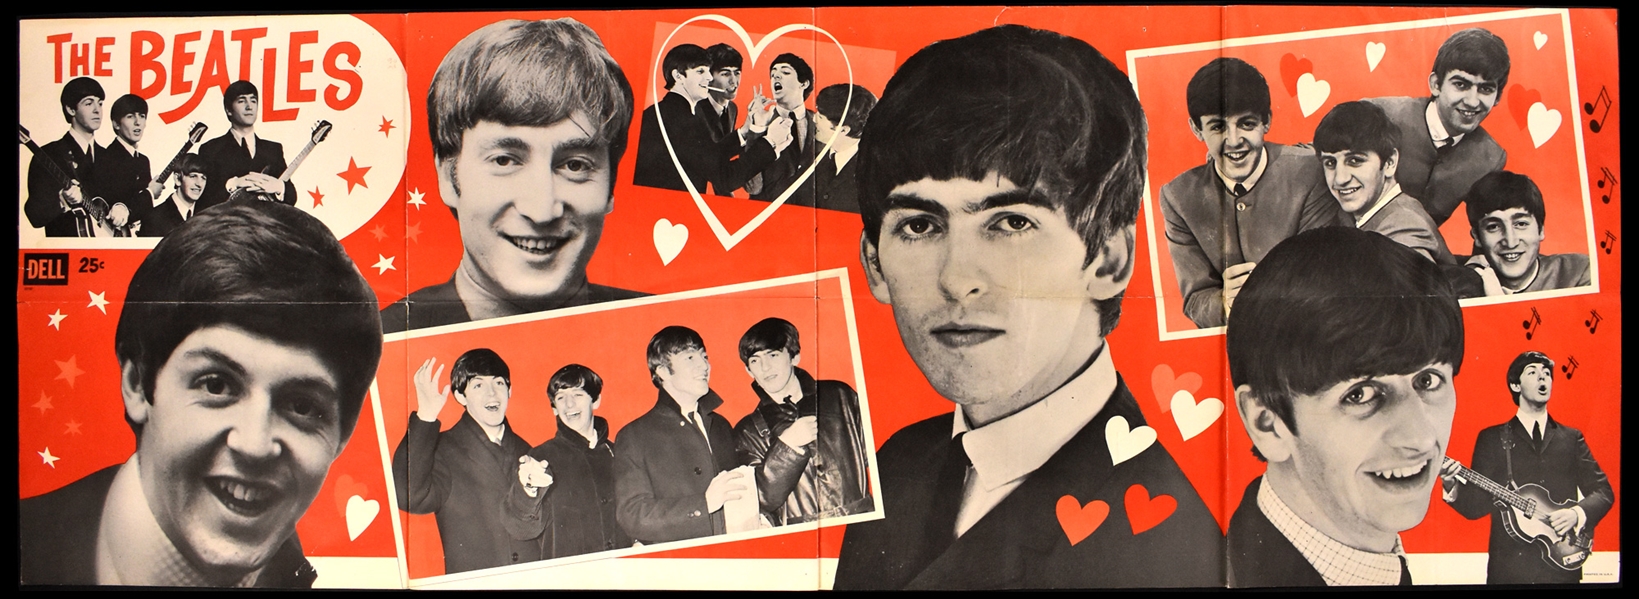 1964 Beatles “Dell” Massive Poster – 52 Inches in Length!